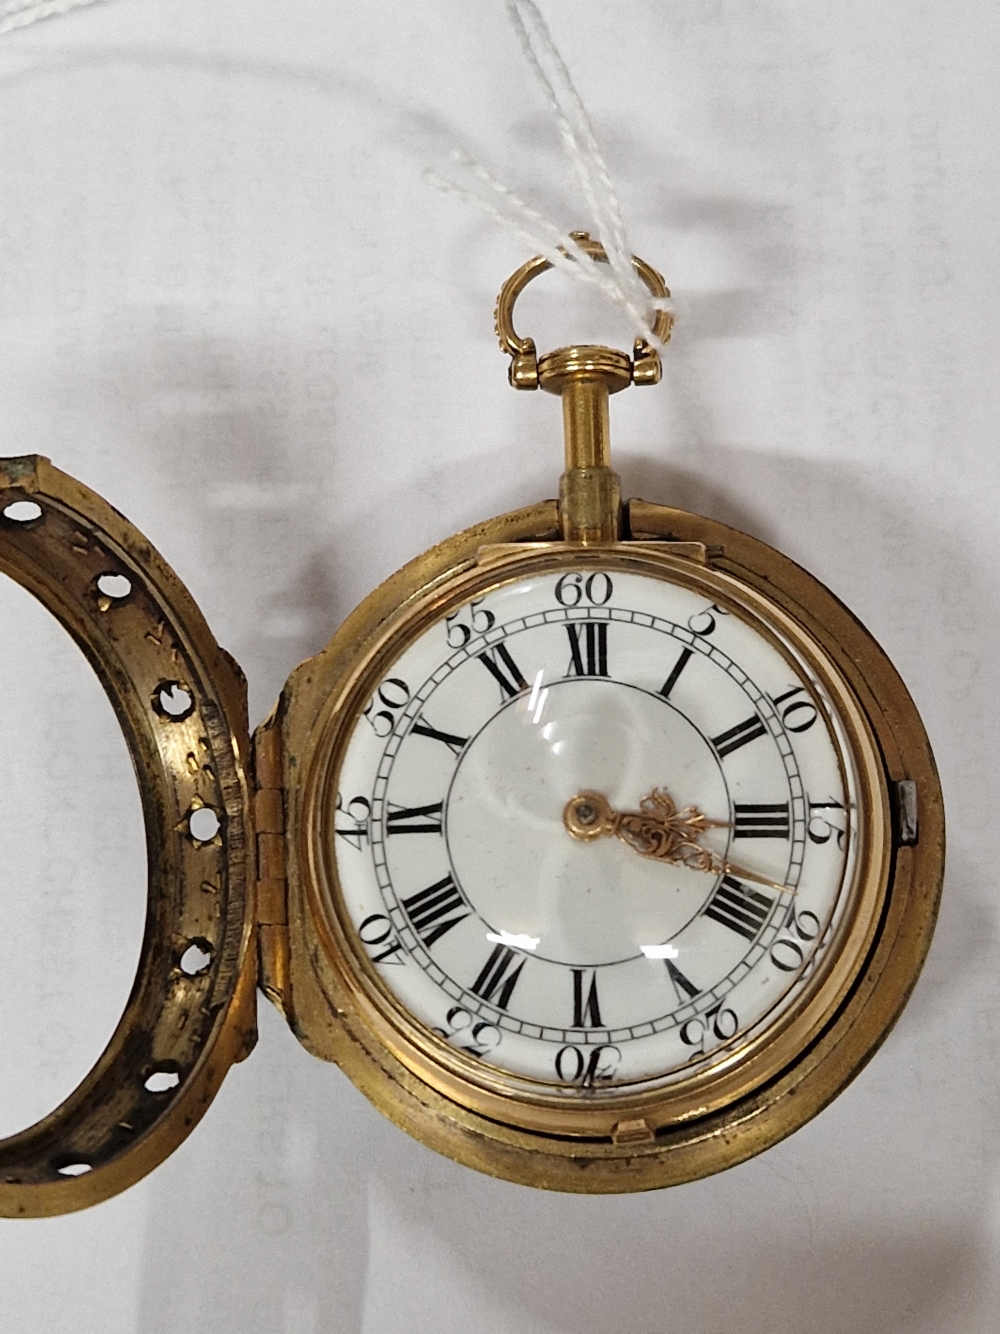 AN ANTIQUE GOLD PAIR CASED POCKET WATCH, SIGNED BONLY LONDON, (SIC) PROBABLY DEVERAUX BOWLEY, - Image 11 of 21